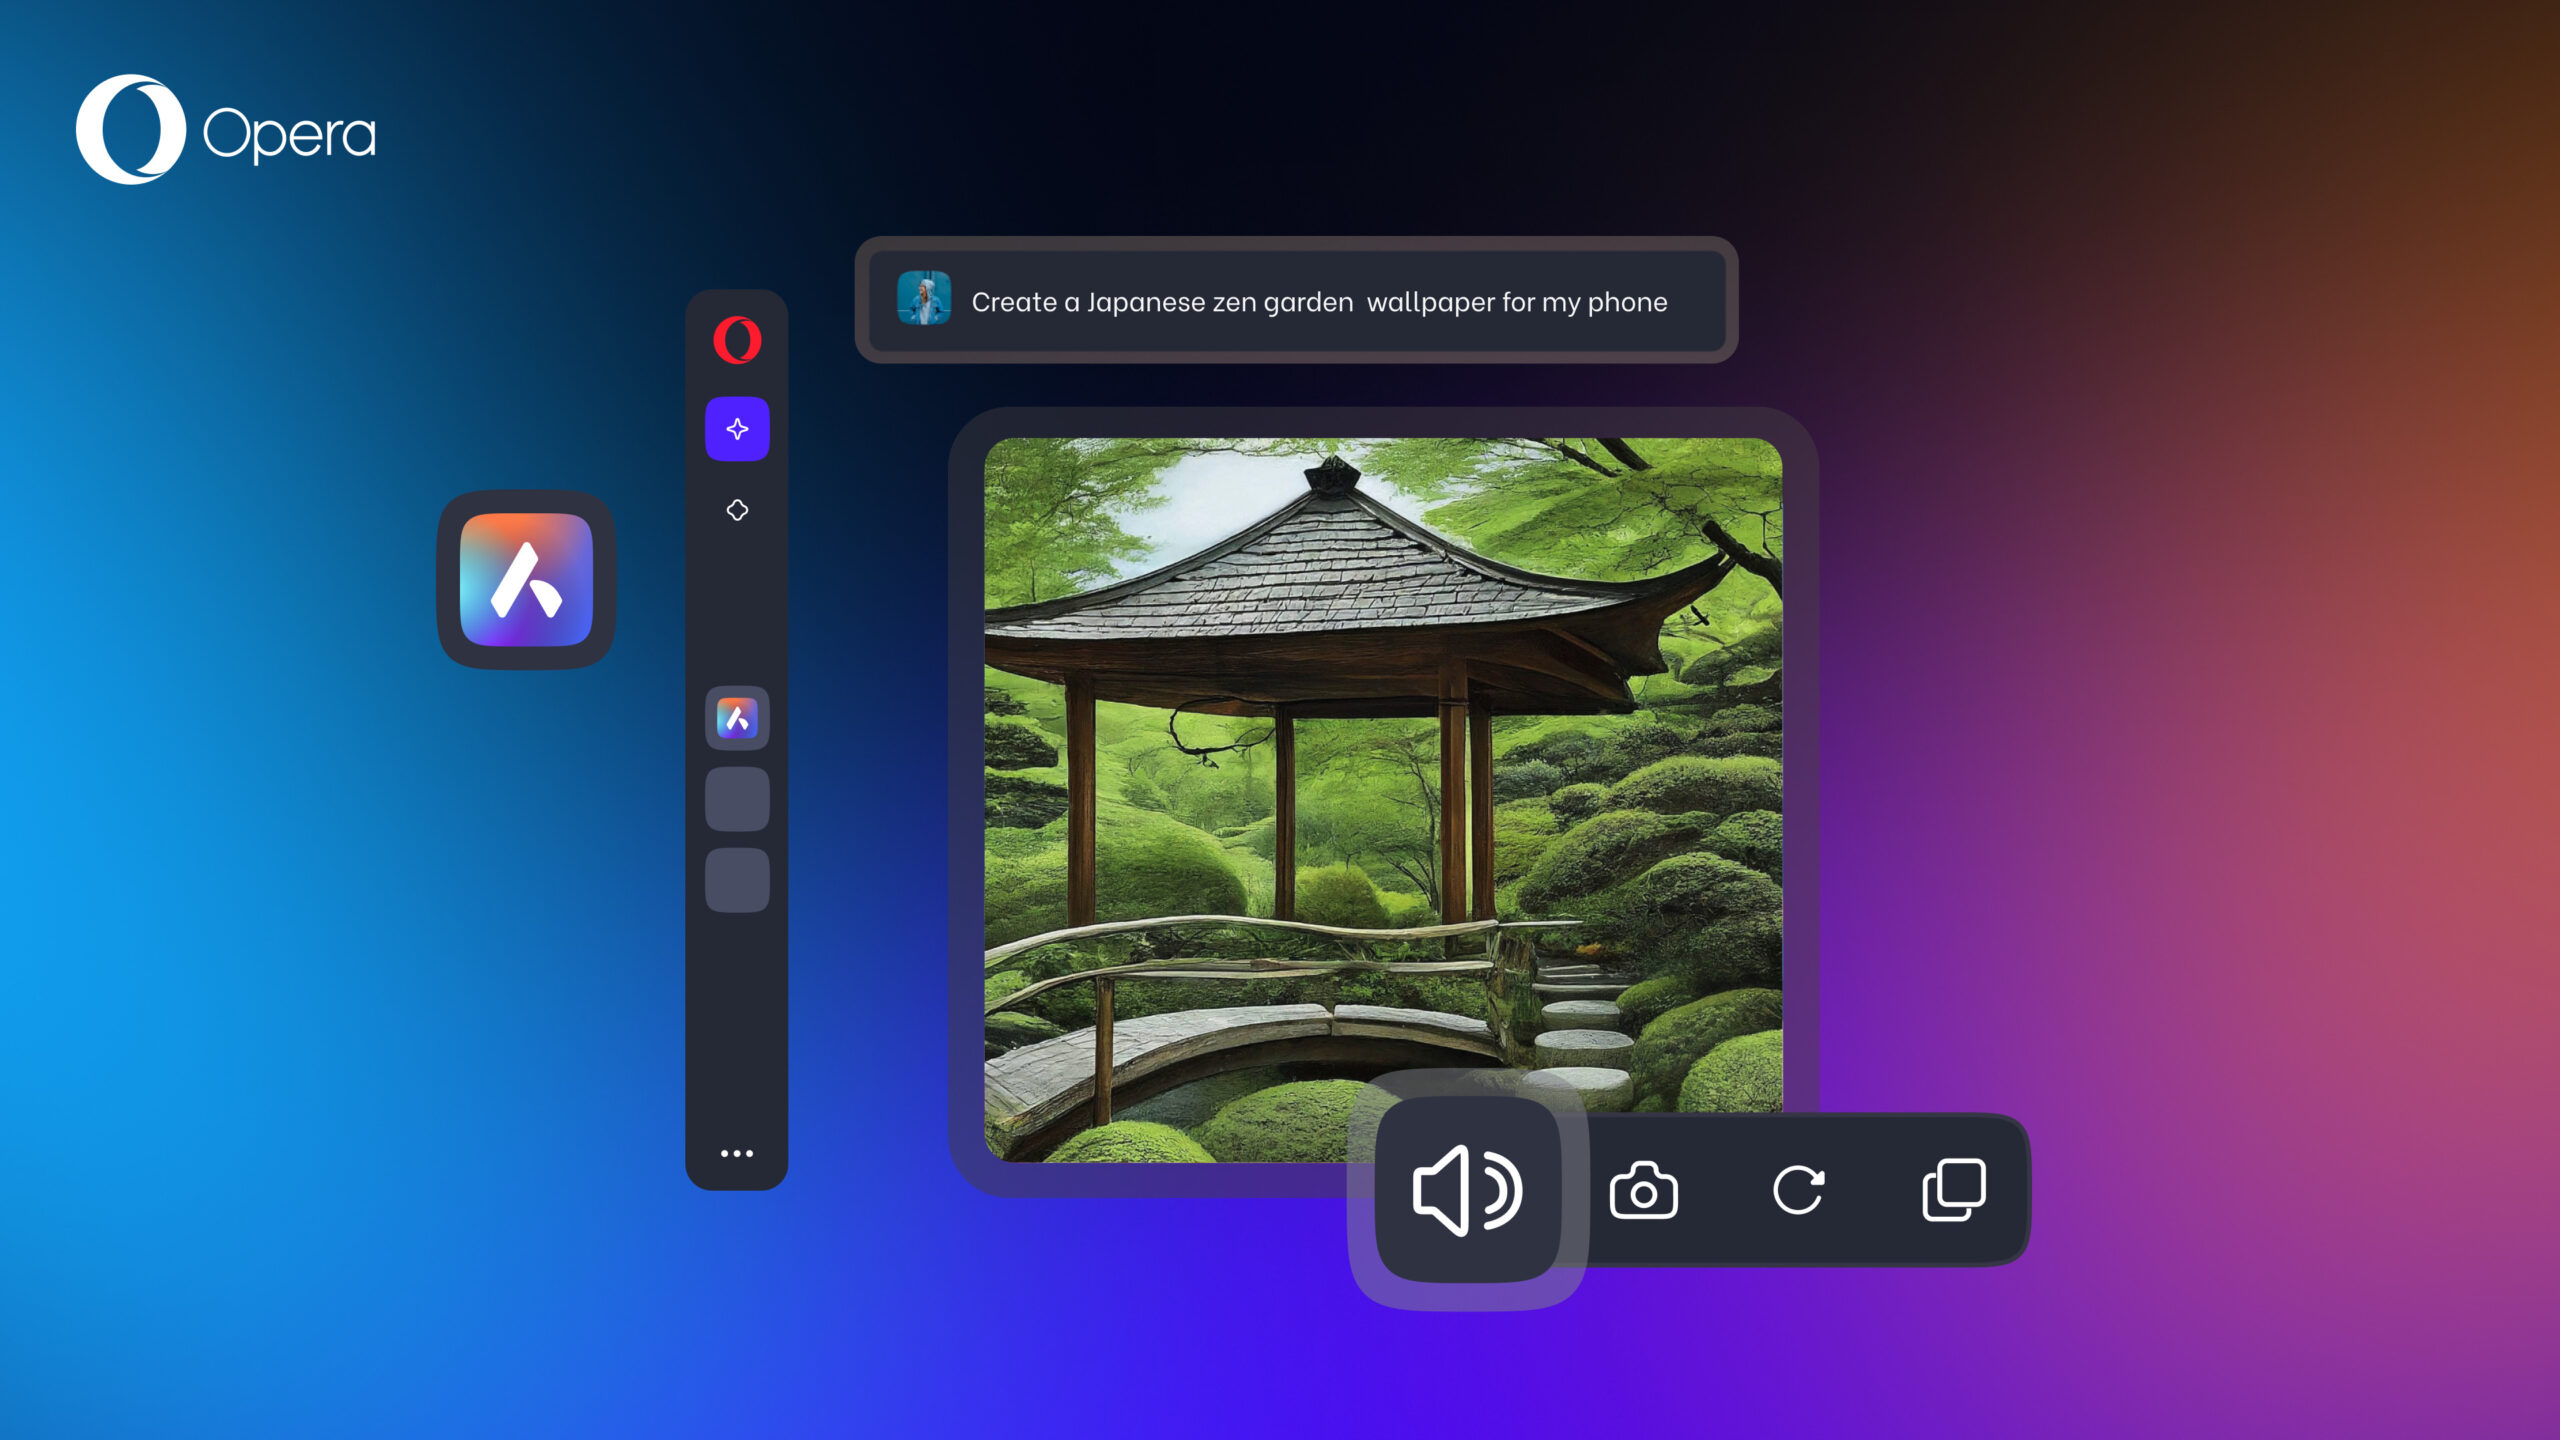 Aria creates a Japanese Zen garden right in the chat box.